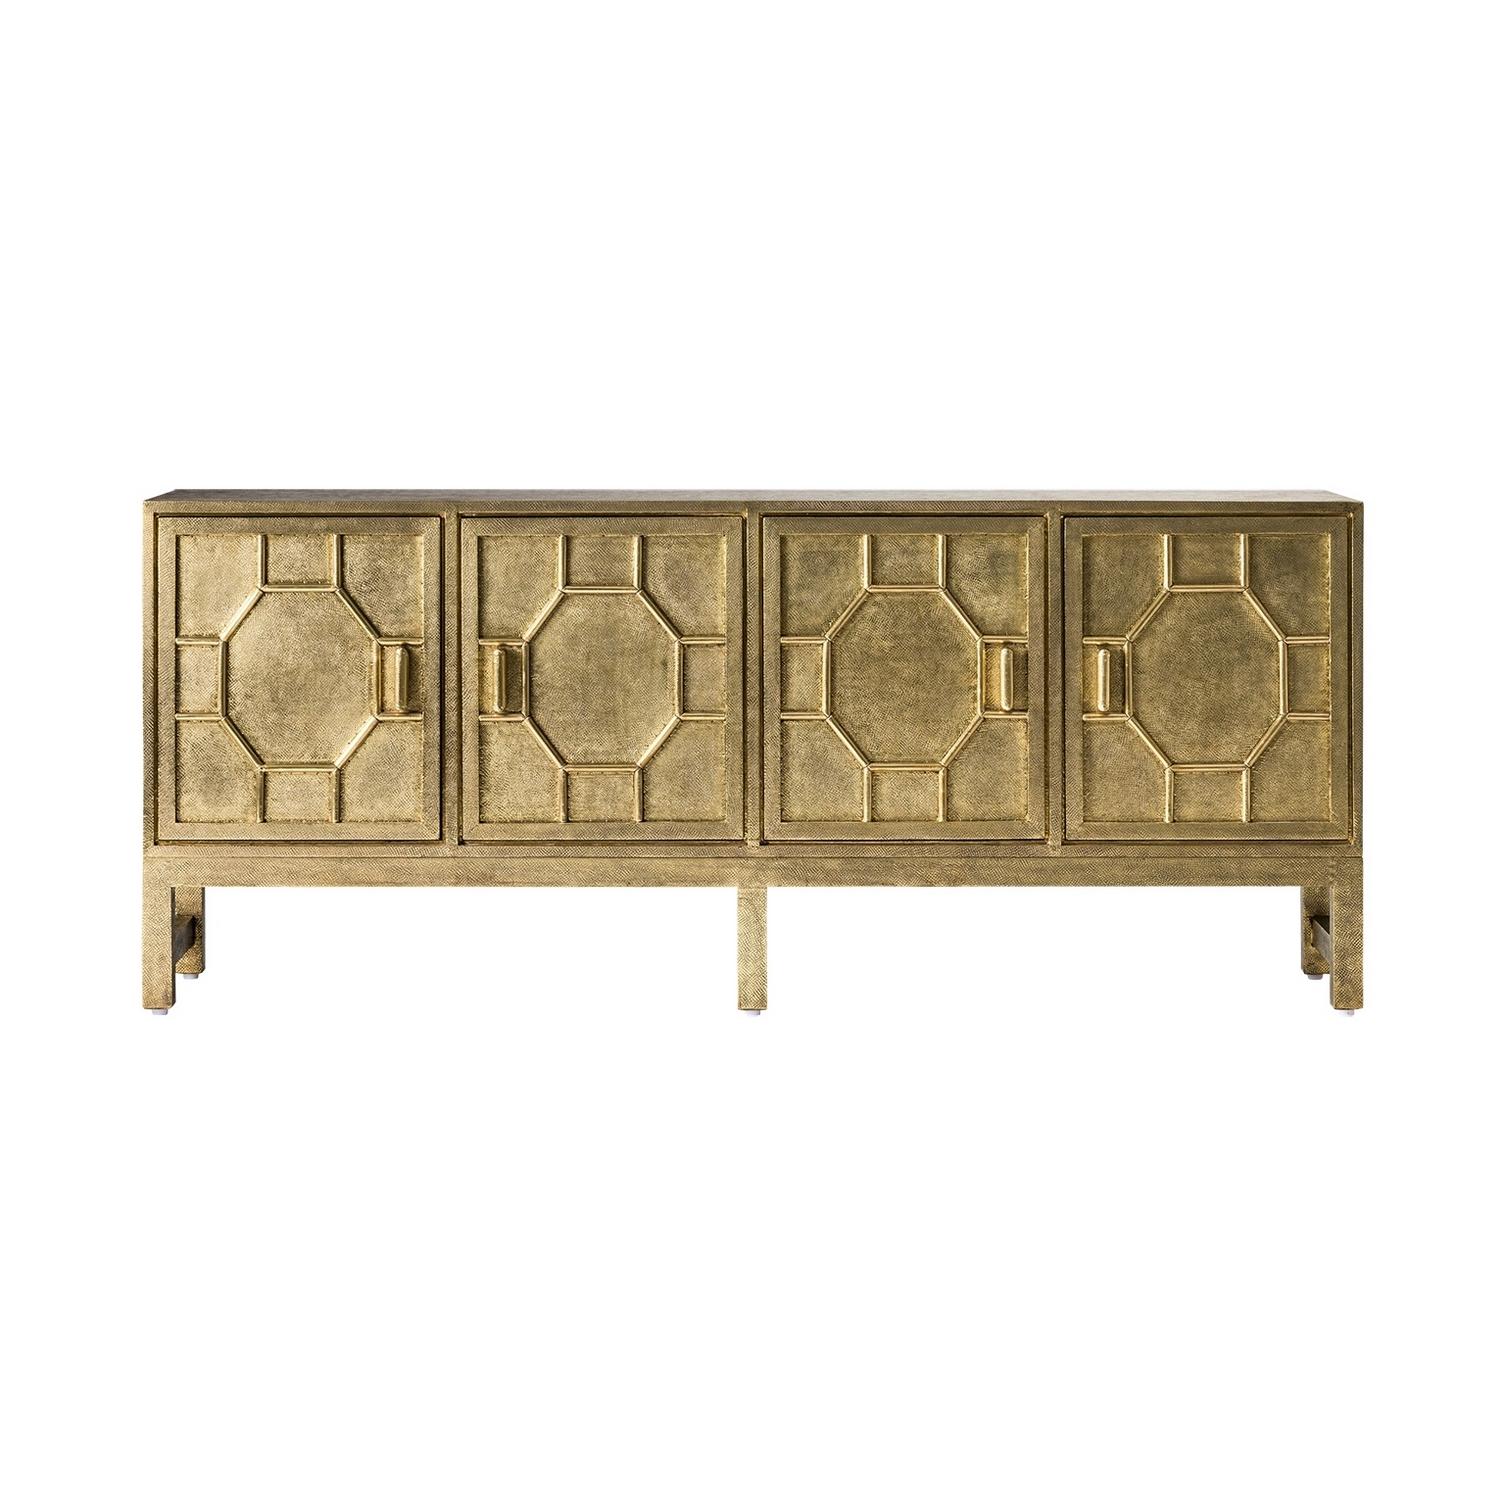 Brutalist style wooden and brass sideboard: An eyecatcher with geometrical and harmonious lines, composed of a wooden structure with 4 graphic door panels, all adorned with brass metal. Patina effect and gorgeous design in new condition!